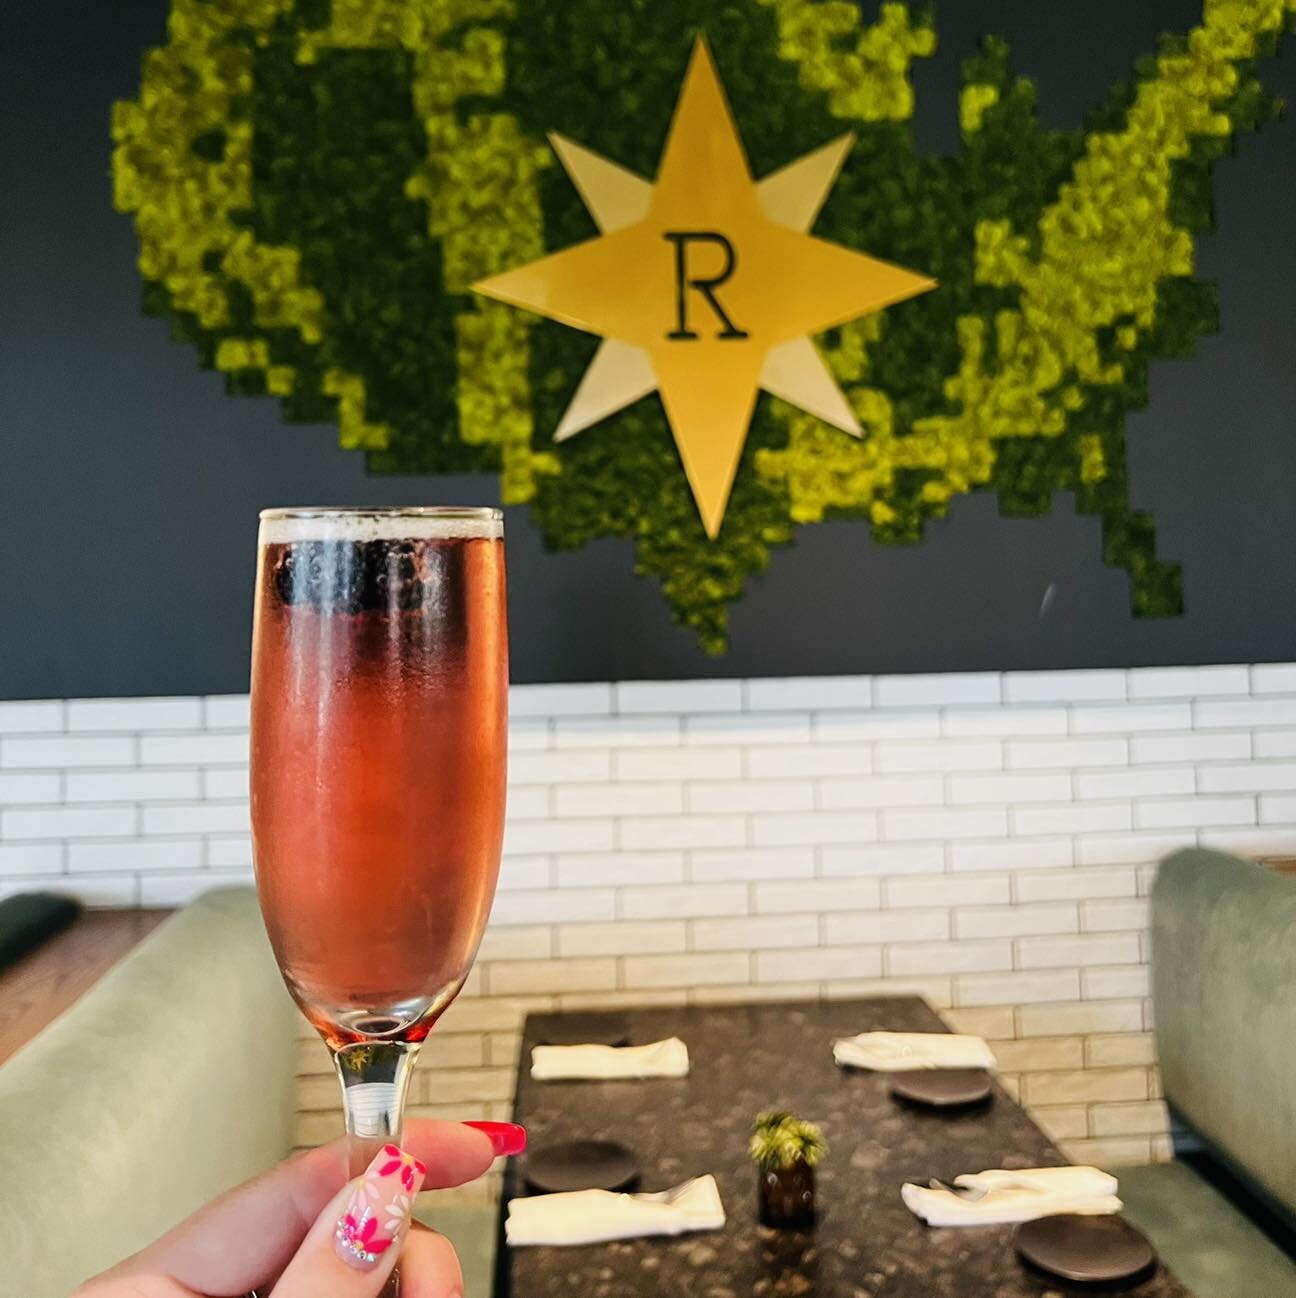 Join us this morning for brunch with a Kir Royale and live music from our favorite harpist, @lily_plays_harp!! Cheers!! 🍾🥂

#brunch 
#brunchtime 
#kirroyale 
#cheers
#harpist 
#livemusic 
#sundayfunday 
#americanrevelry 
#burlesontx